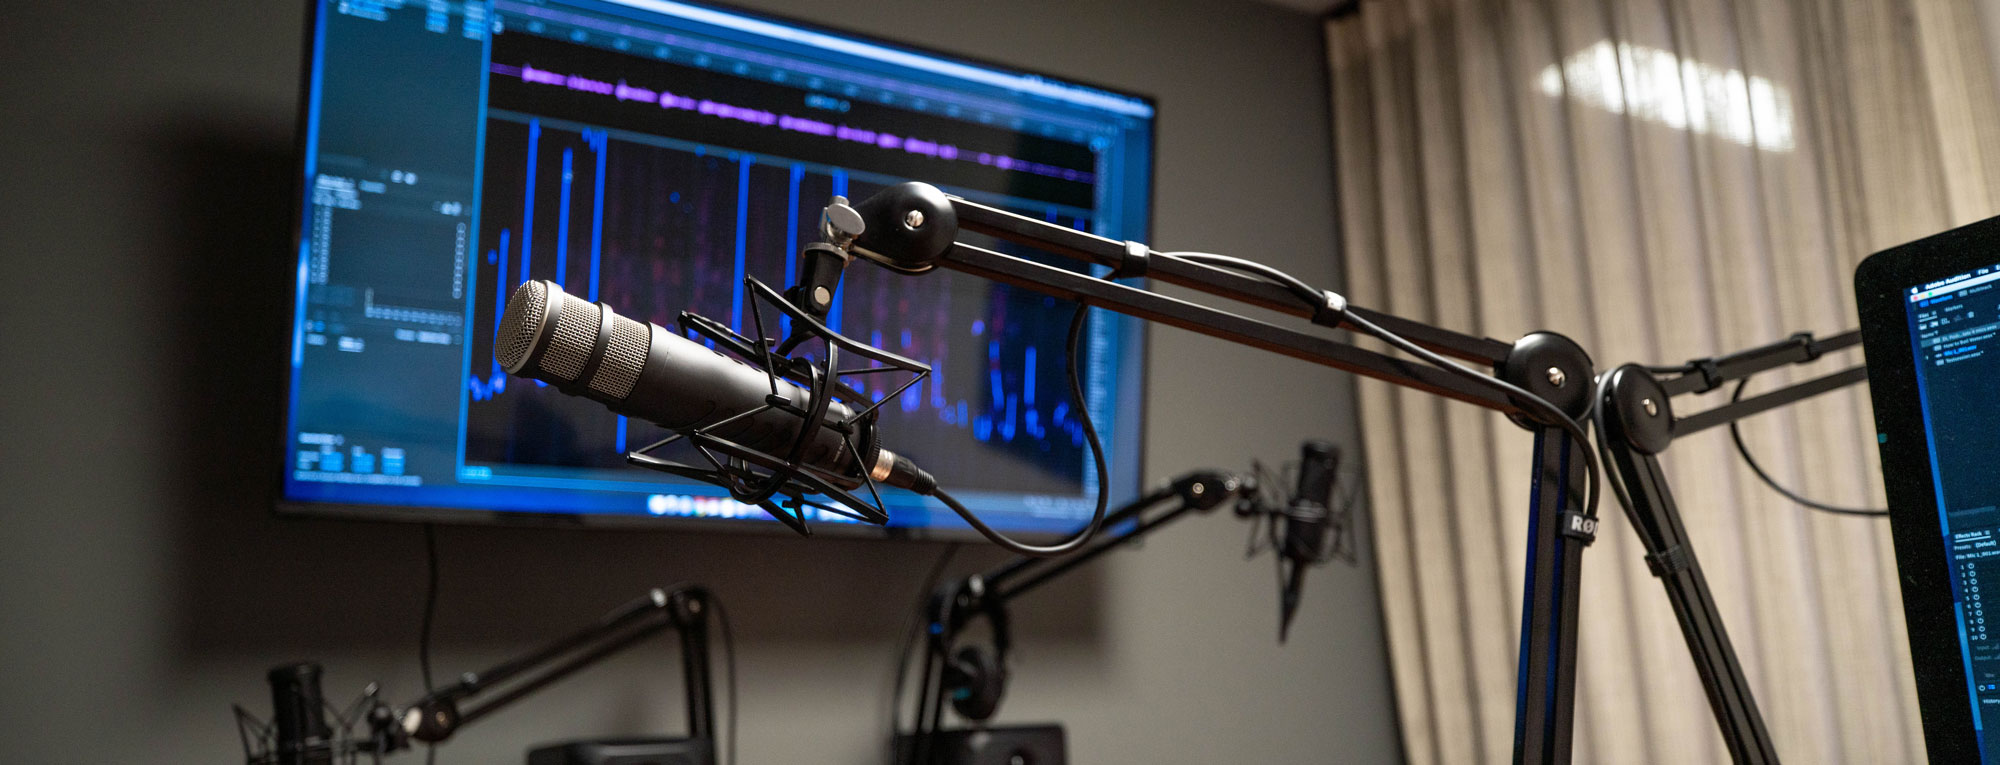 Digital Learning Studios' new podcast room microphones and screen